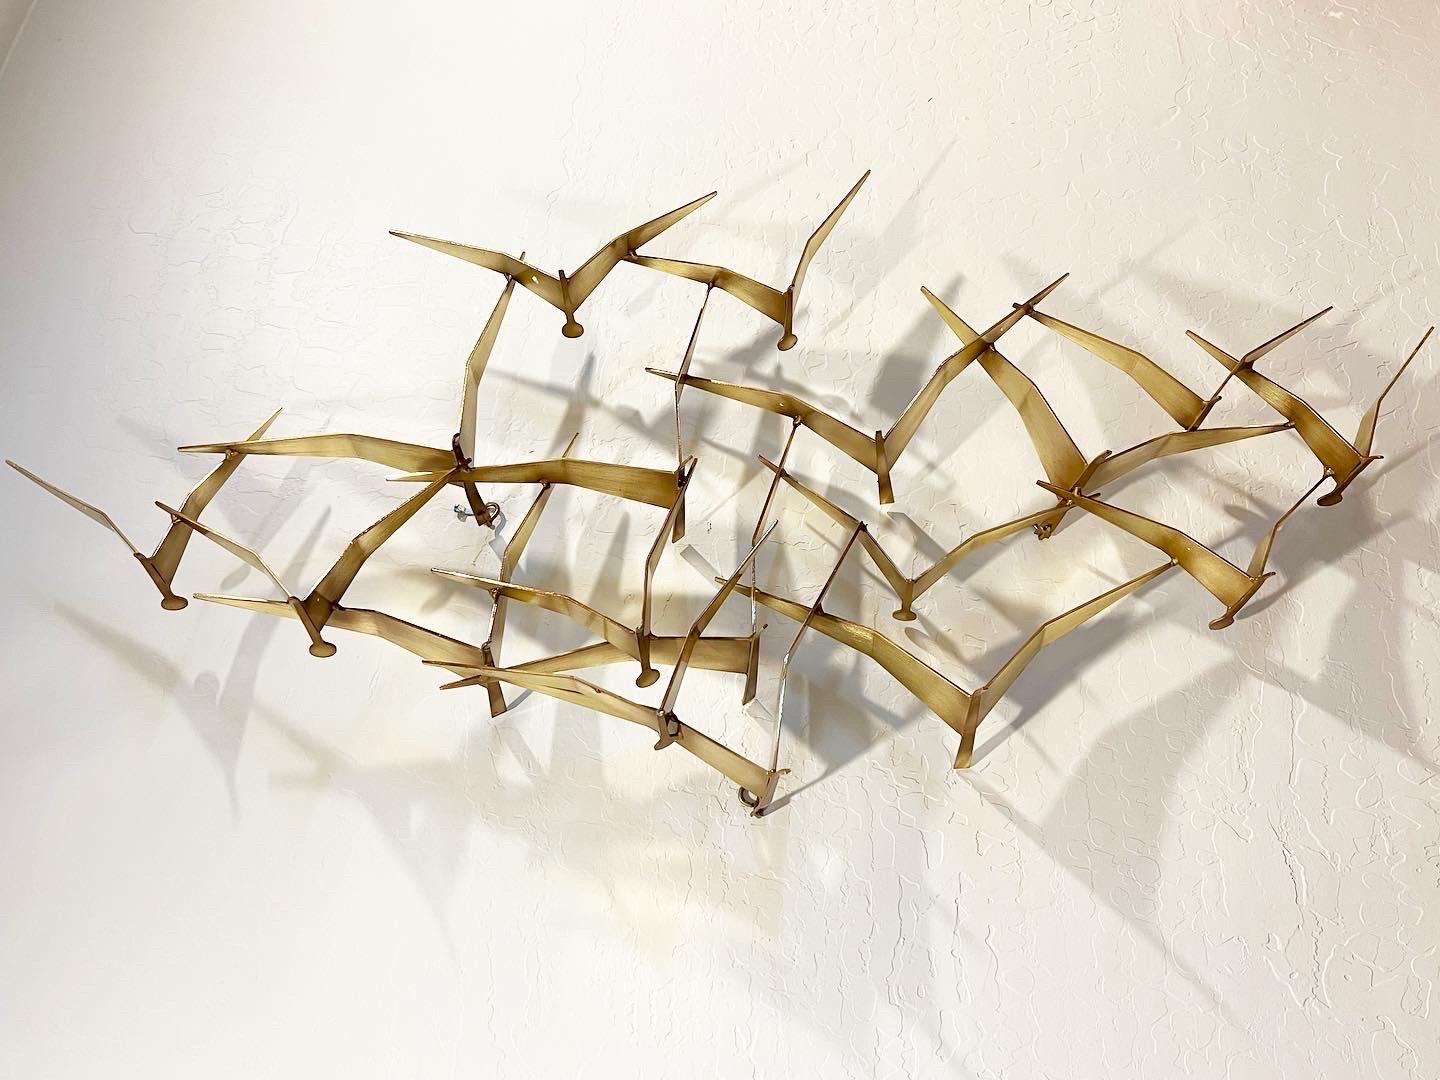 Curtis Jeré “Seagulls” brass wall sculpture. Often referred to as “Birds in Flight”. Originally designed in 1960, this particular design is a classic. Signed 1994 C. Jeré and measures 46” wide x 23” tall x 6” deep. There are three loops on the back